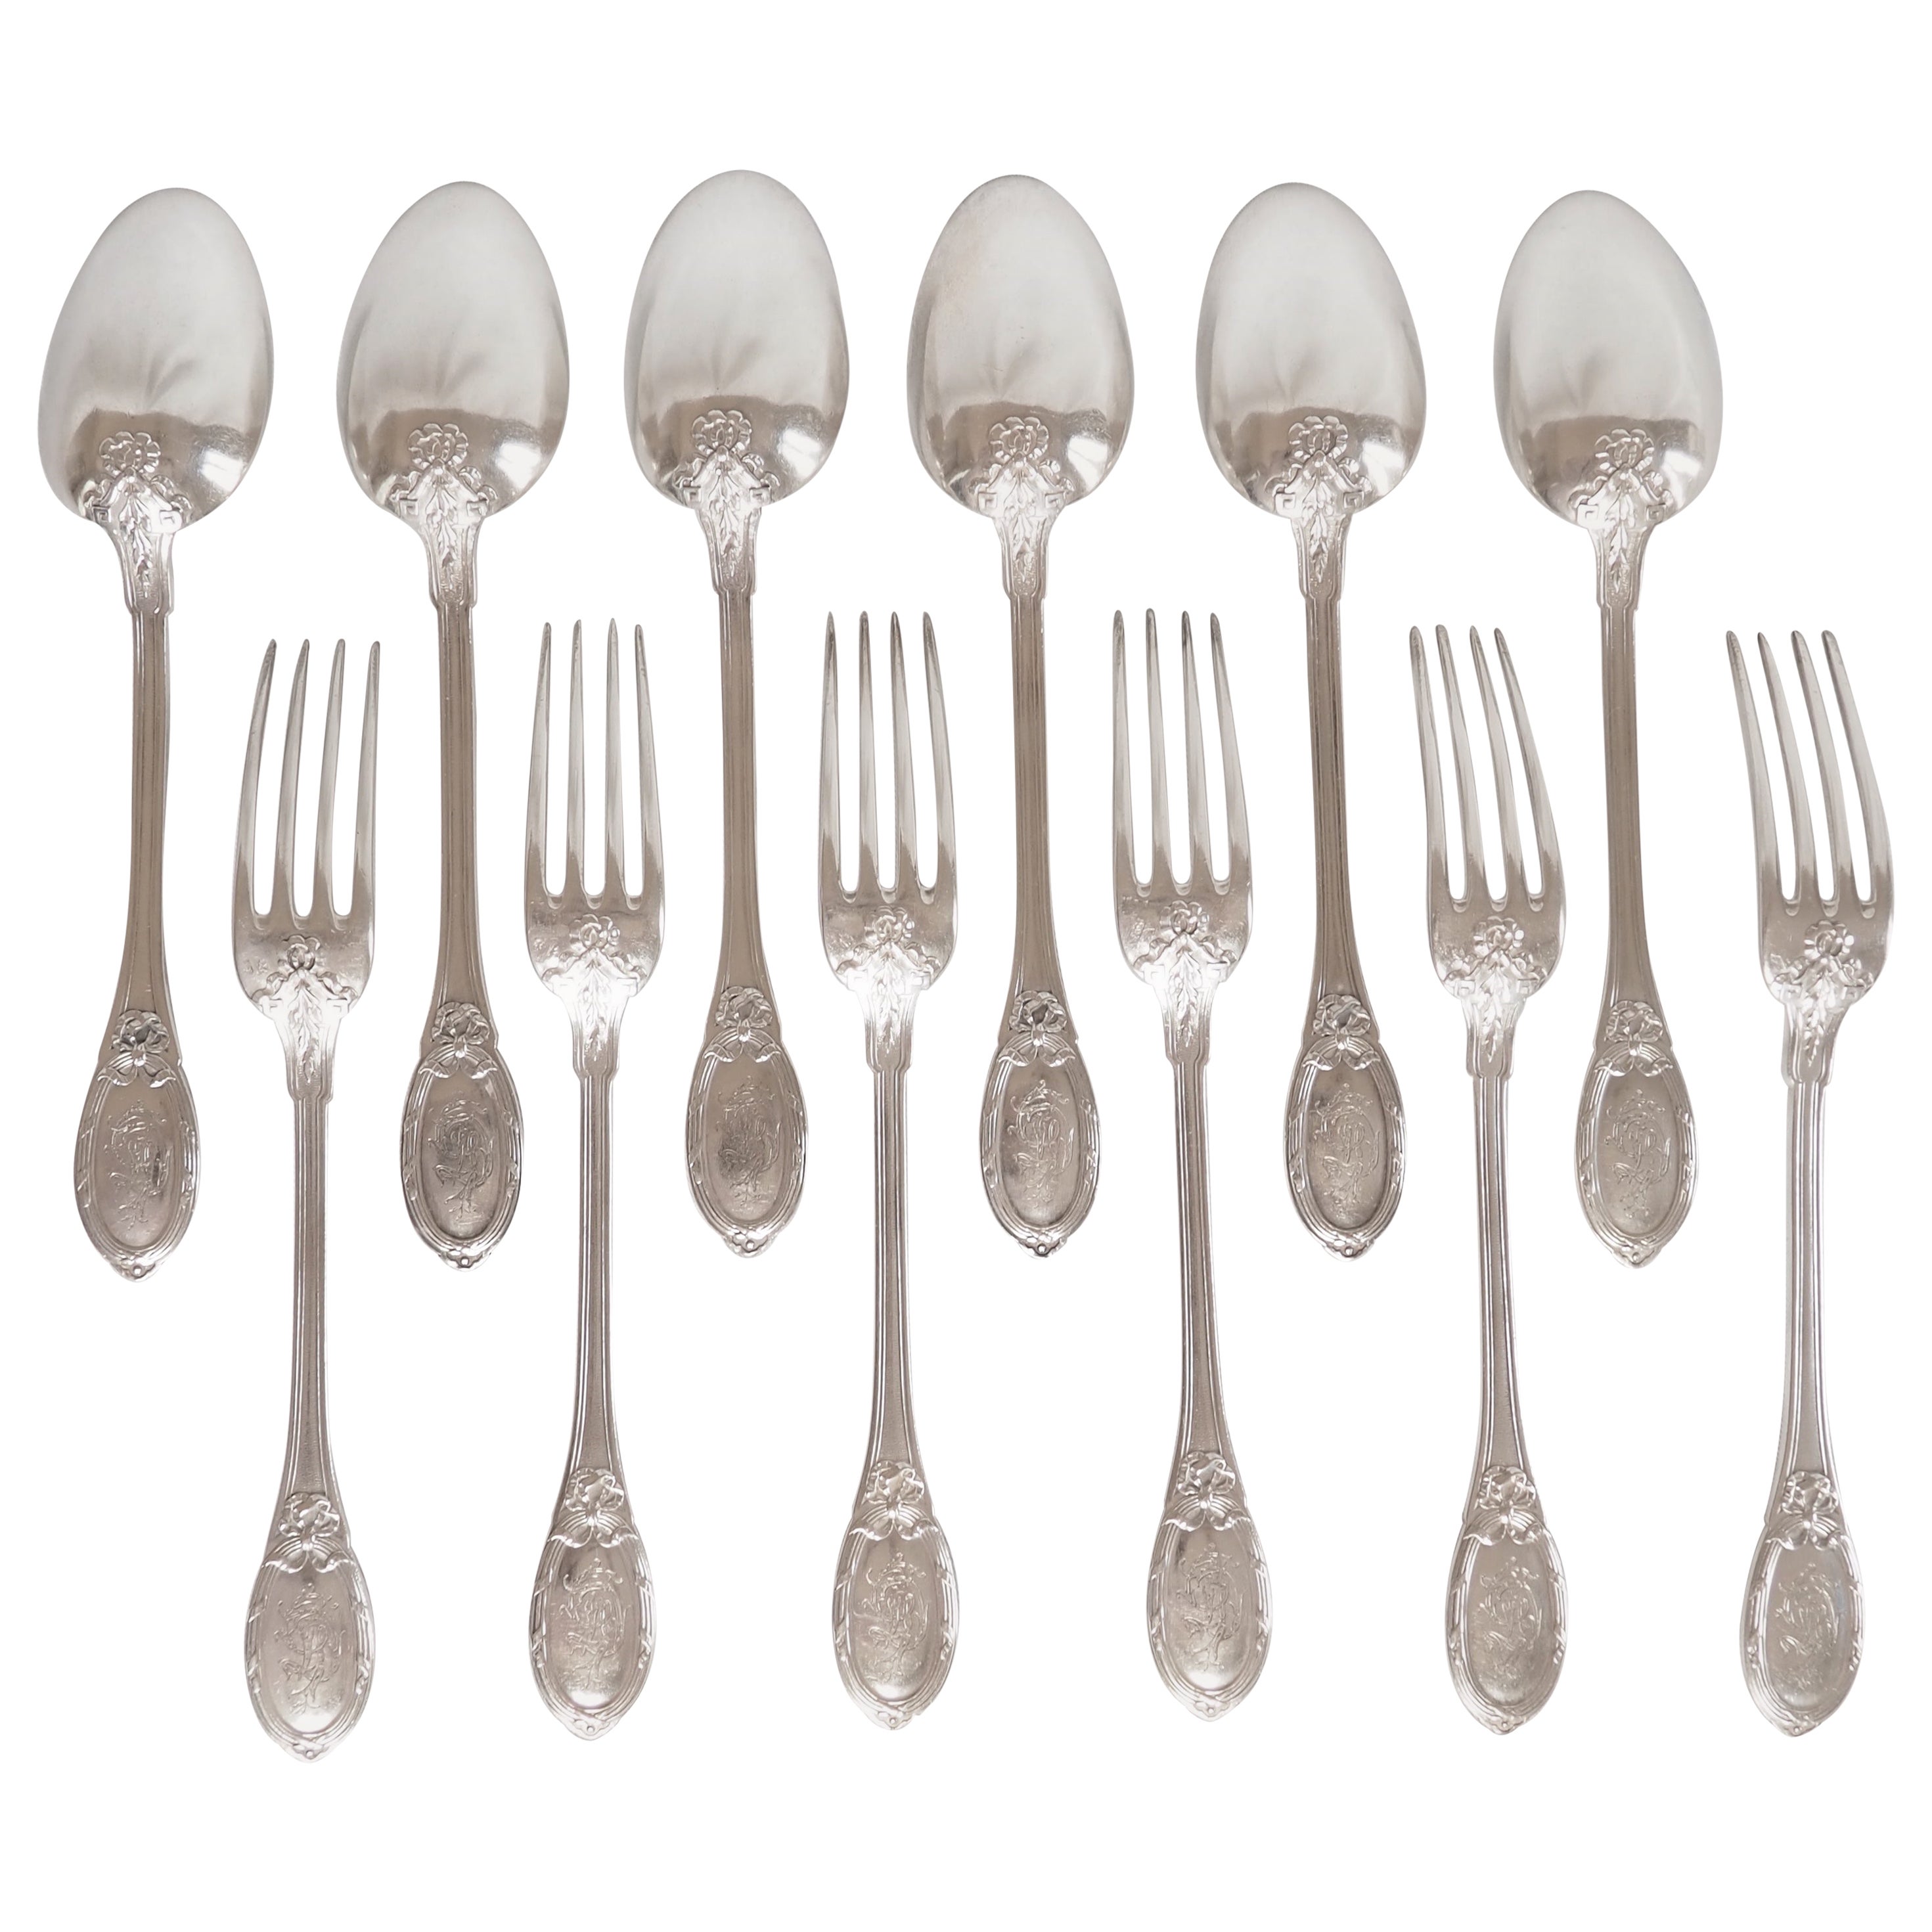 French antique Louis XVI style sterling silver flatware for 6 - Henin & Cie For Sale